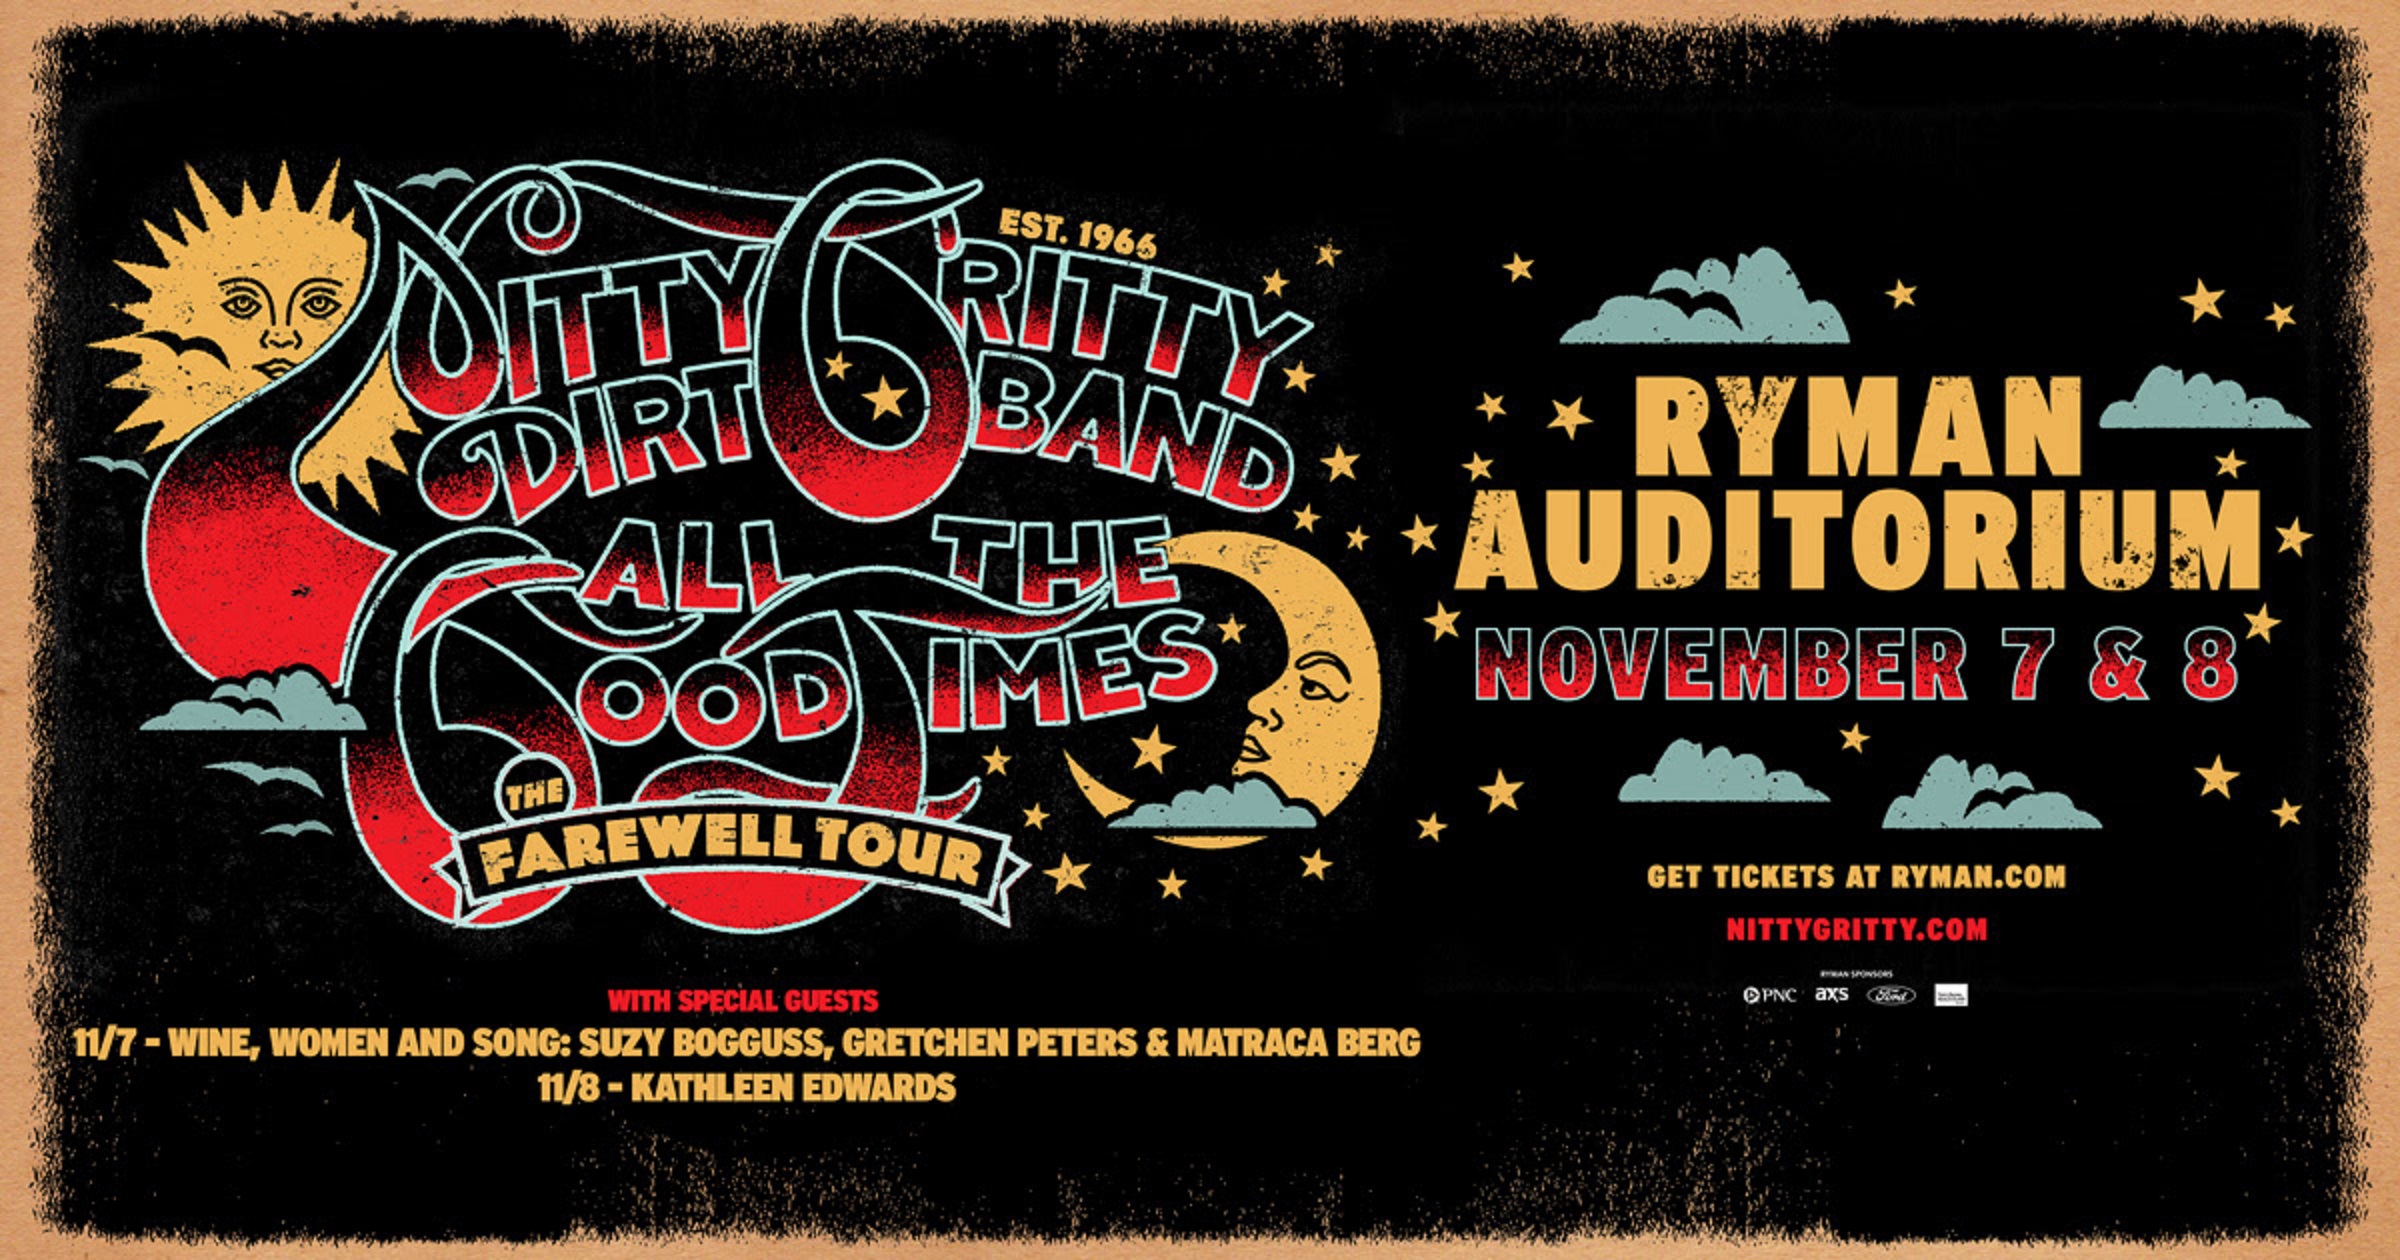 Nitty Gritty Dirt Band Adds 2 Ryman Auditorium Shows Nov. 7 & Nov. 8 to For ALL THE GOOD TIMES: The Farewell Tour